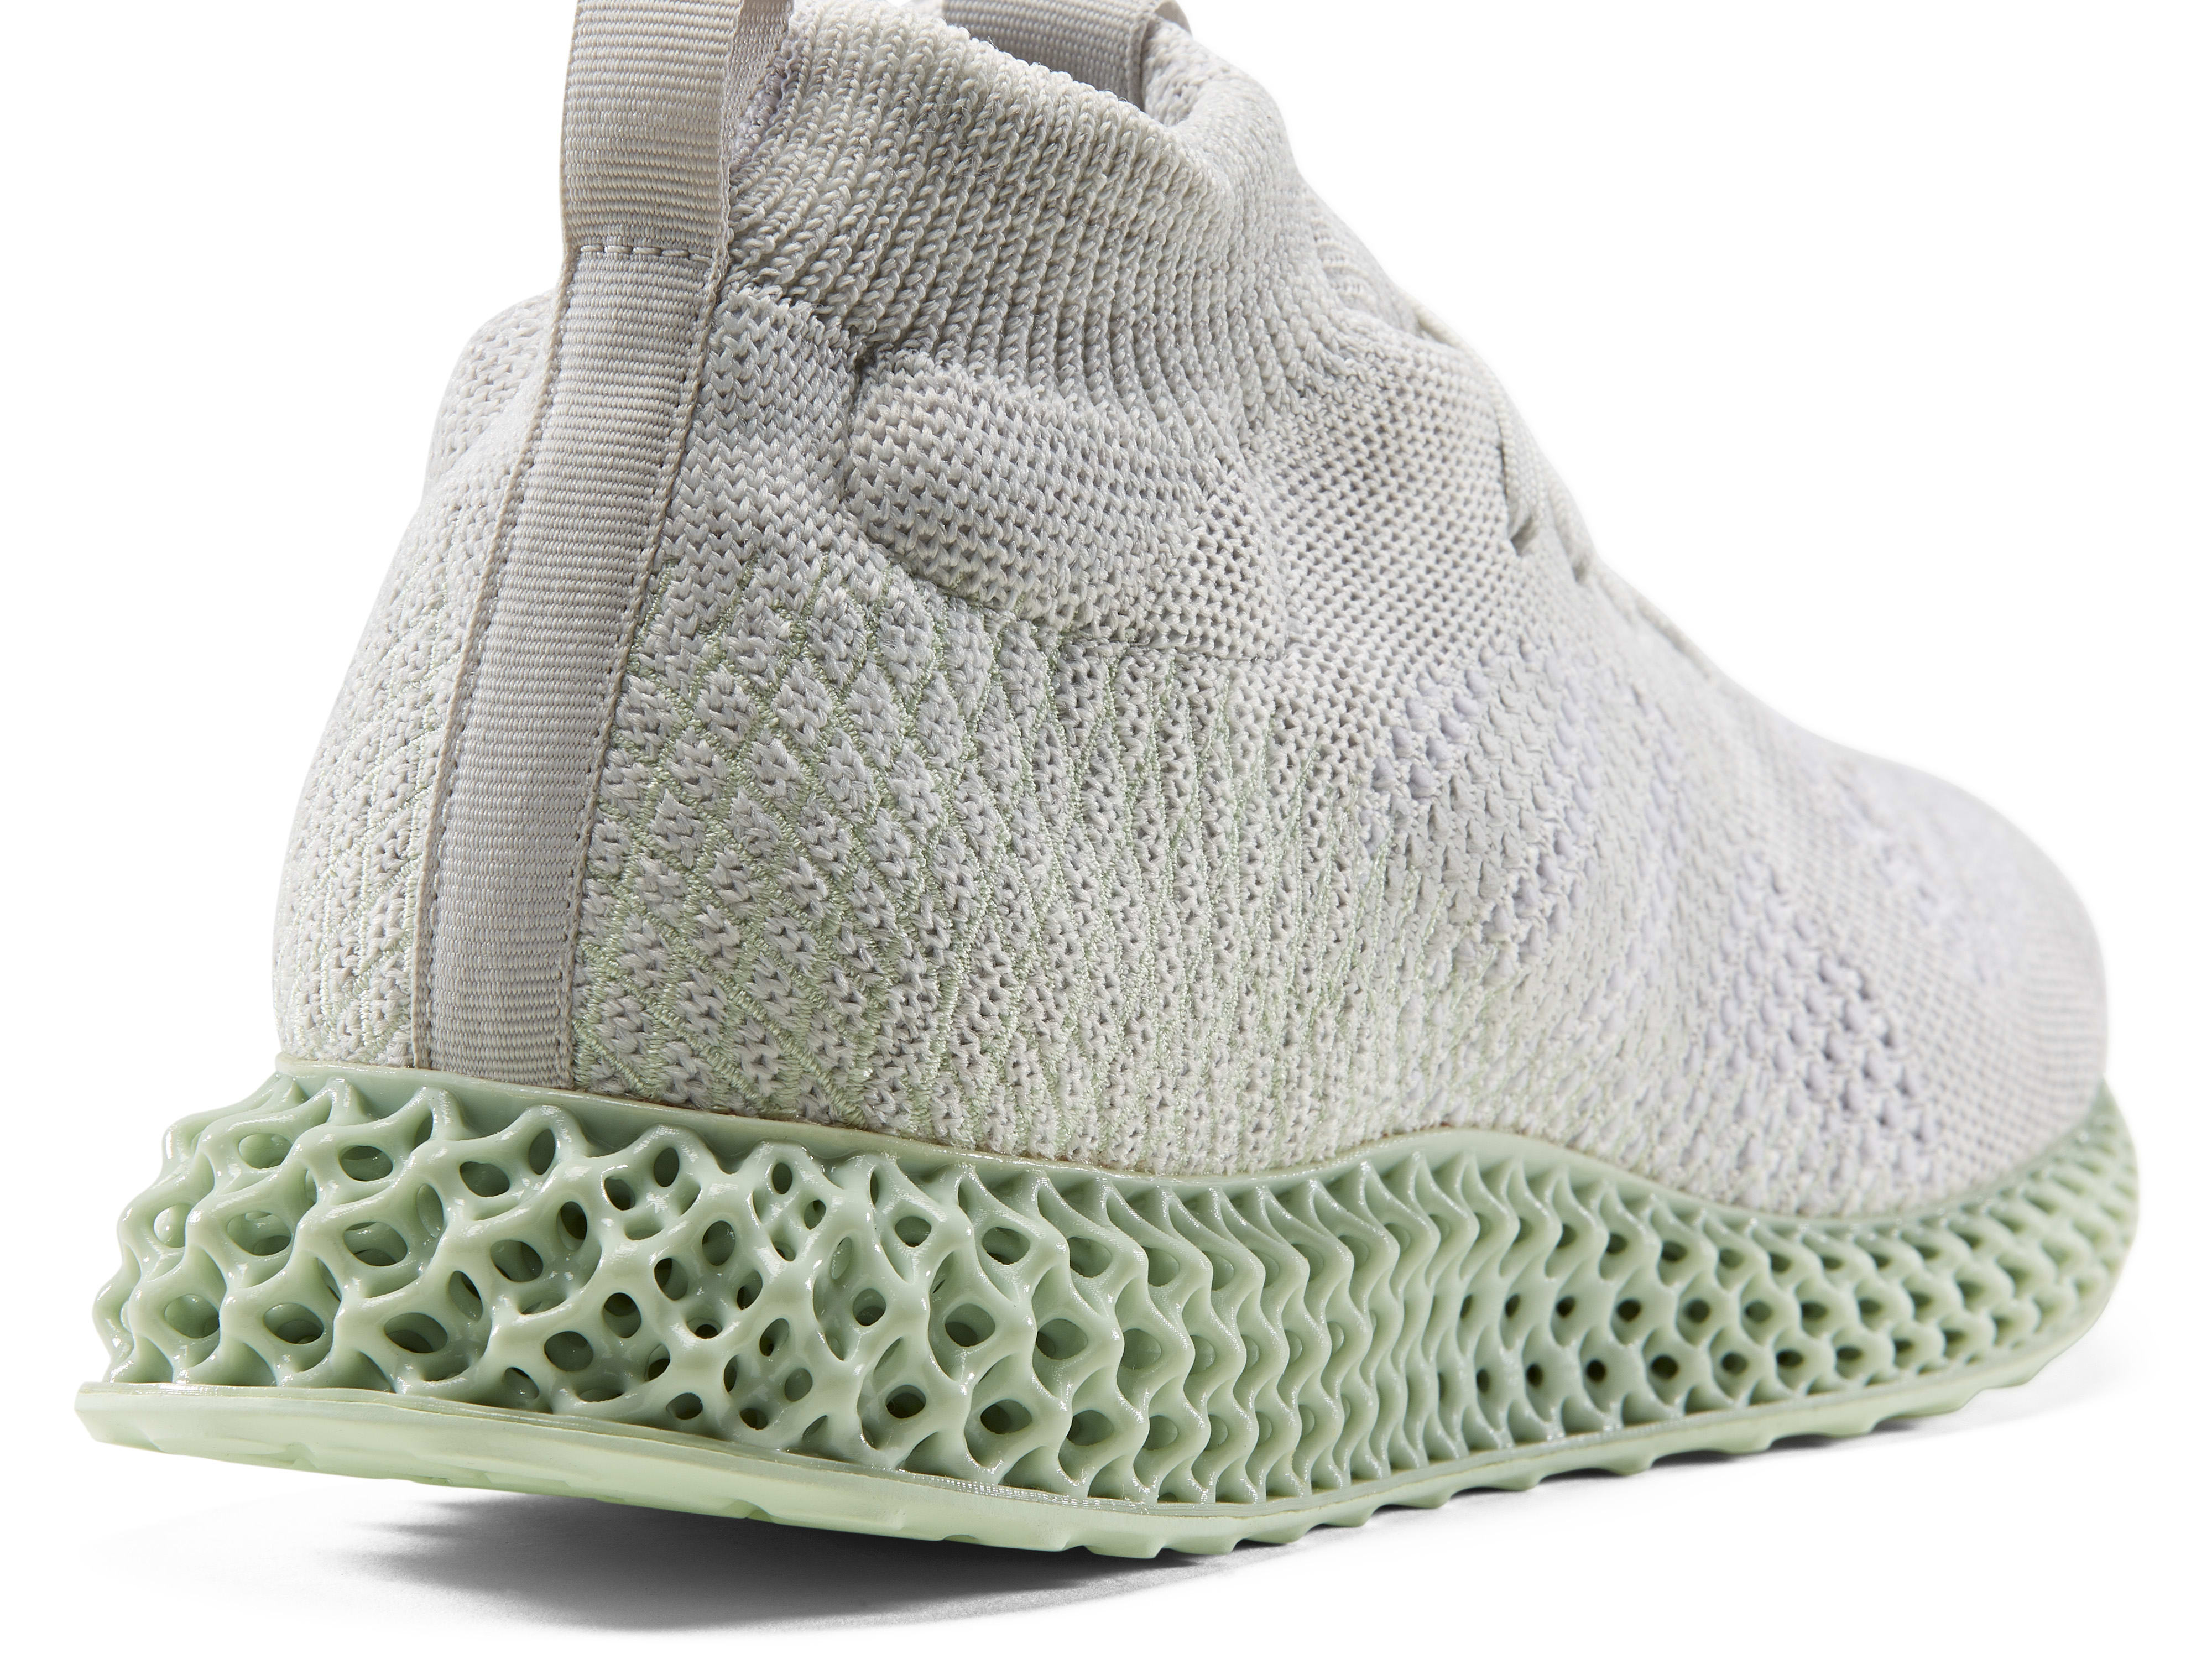 Overwhelming Charles Keasing curse Adidas Consortium Runner 4D Mid 'White' EE4116 Release Date | Sole Collector